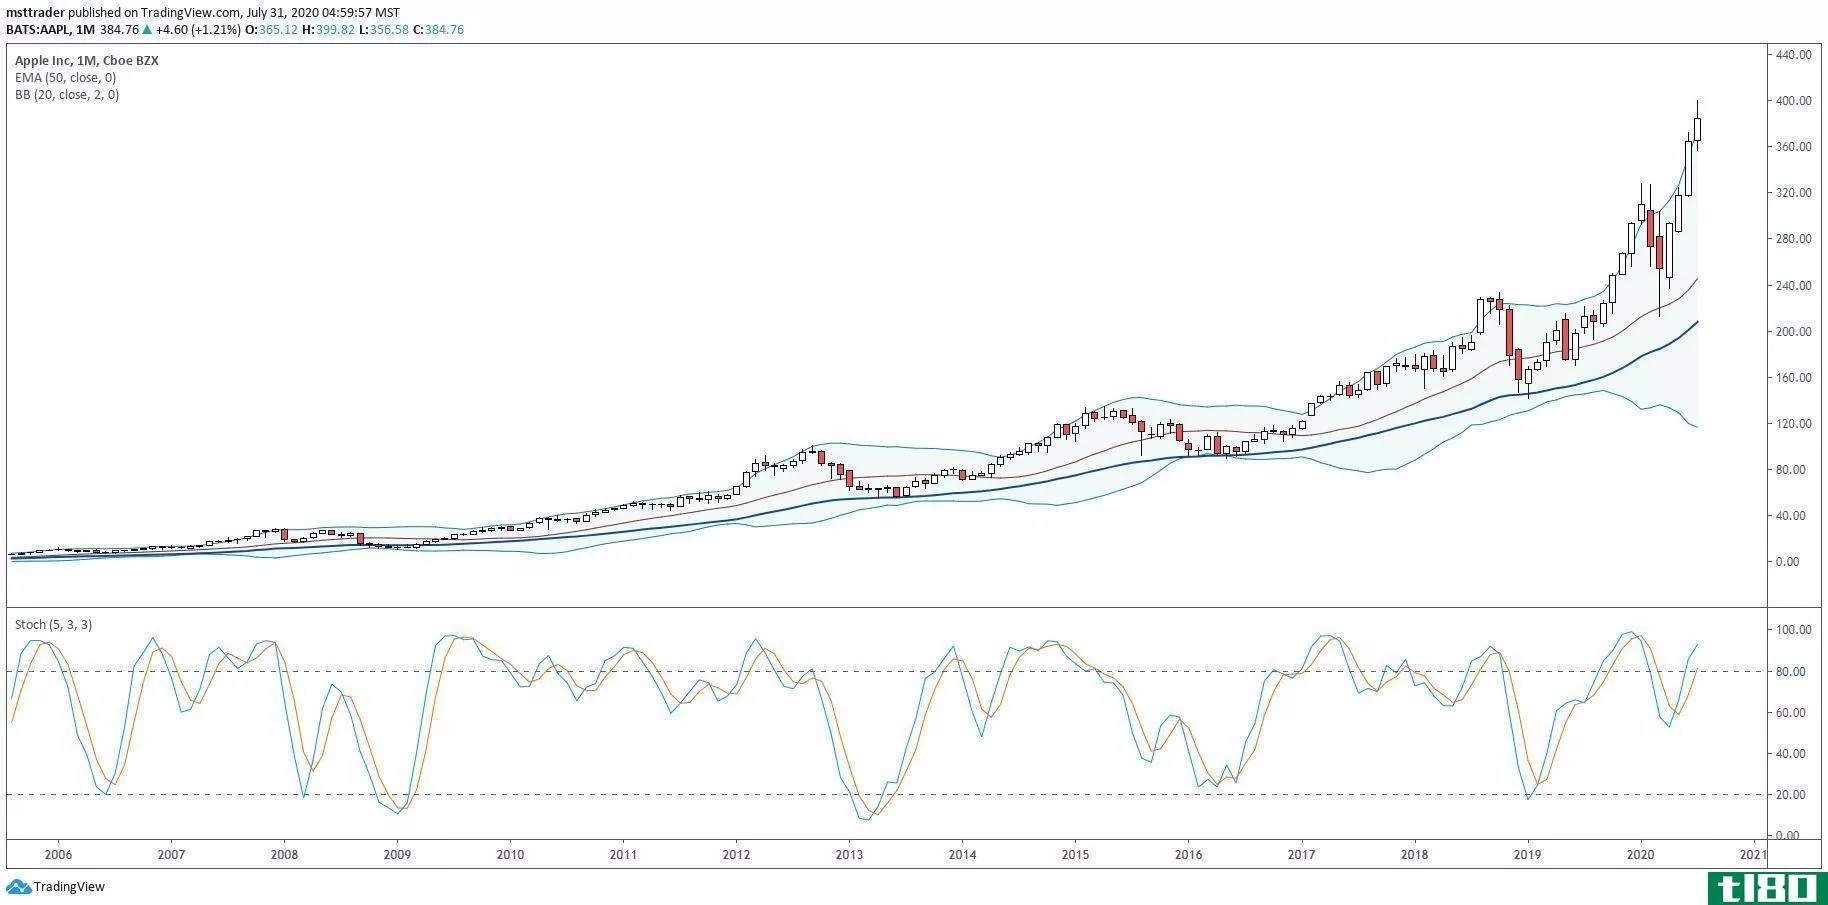 Long-term chart showing the share price performance of Apple Inc. (AAPL)